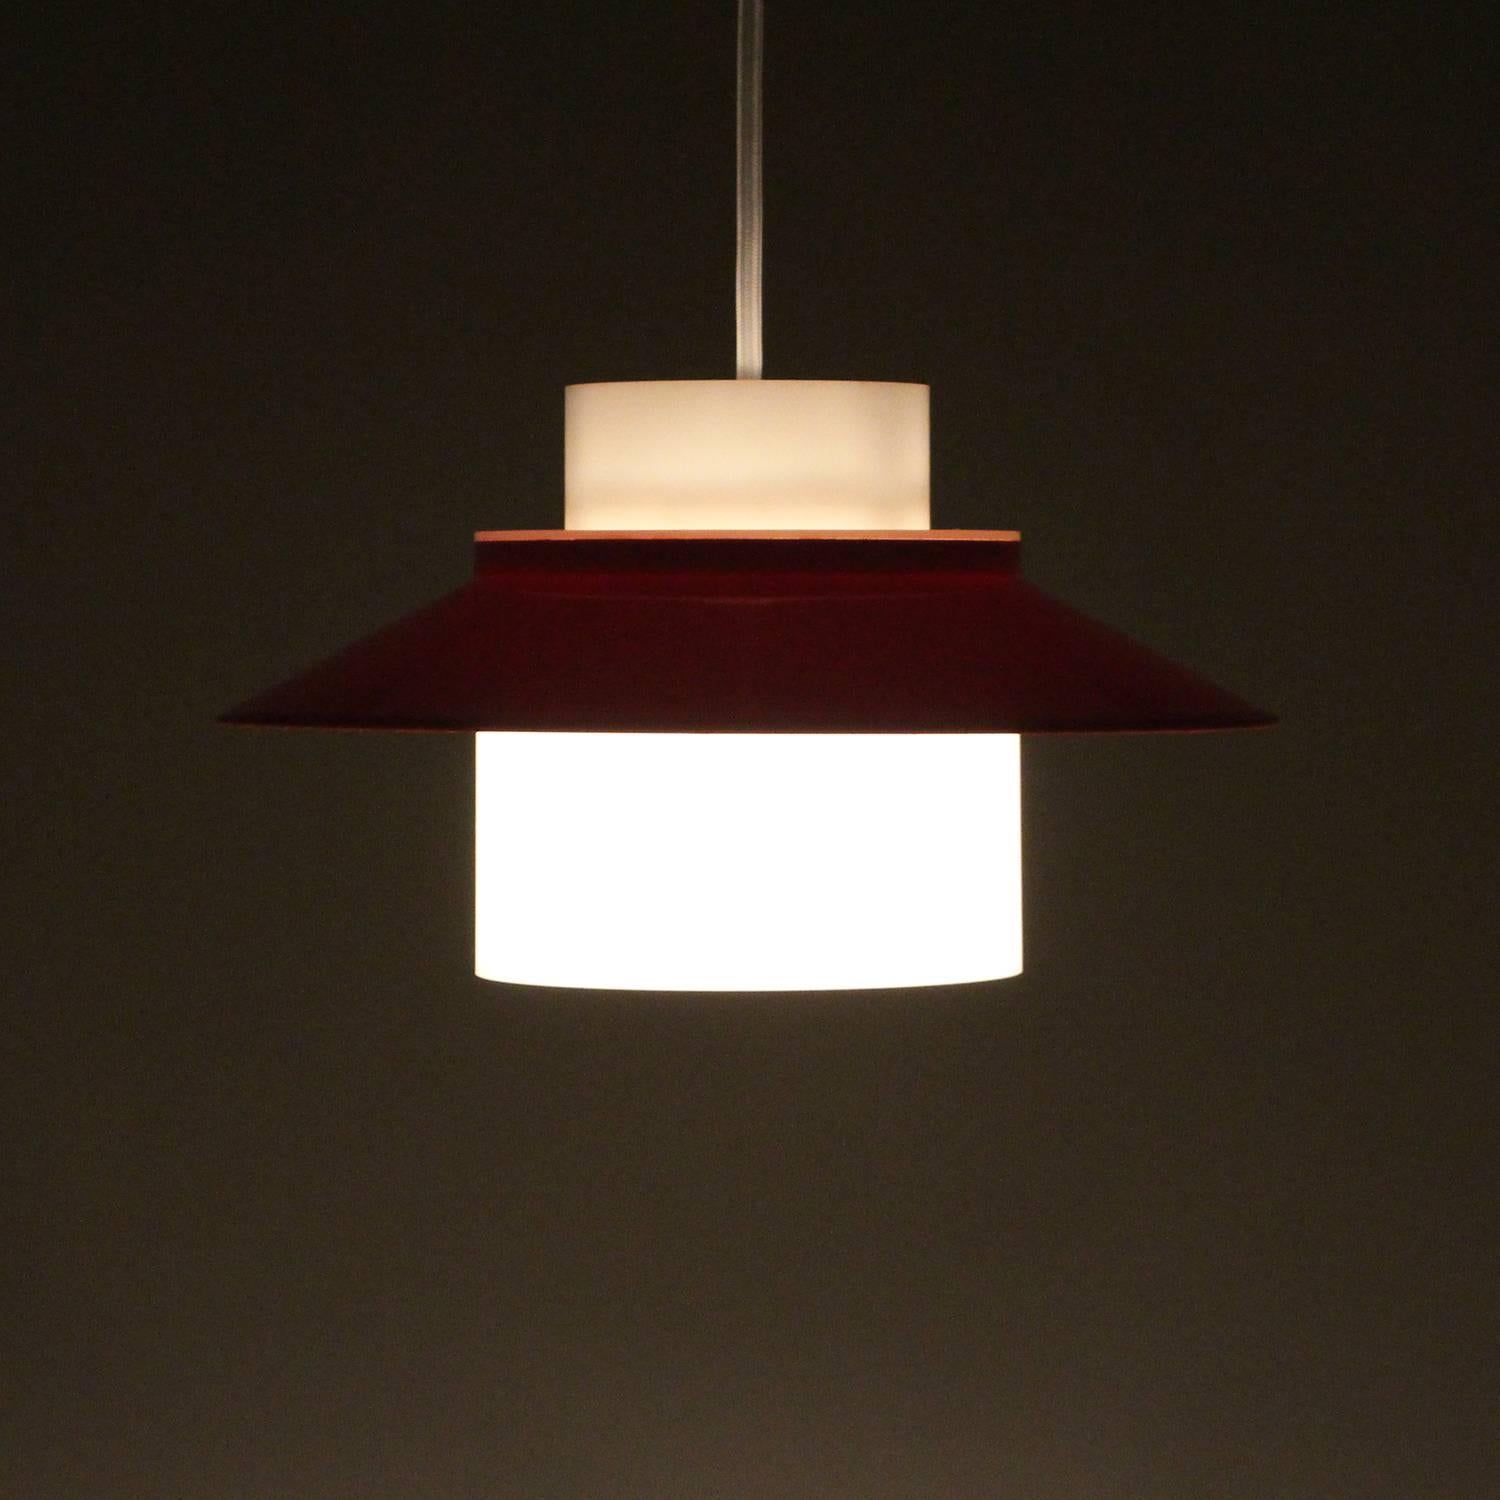 Dinette by Bent Karlby, 1970, produced by Lyfa - Scandinavian Modern red and white acrylic plastic ceiling light in excellent vintage condition.

This stylish pendant is made up of two parts of cast acrylic plastic. The inner core is translucent